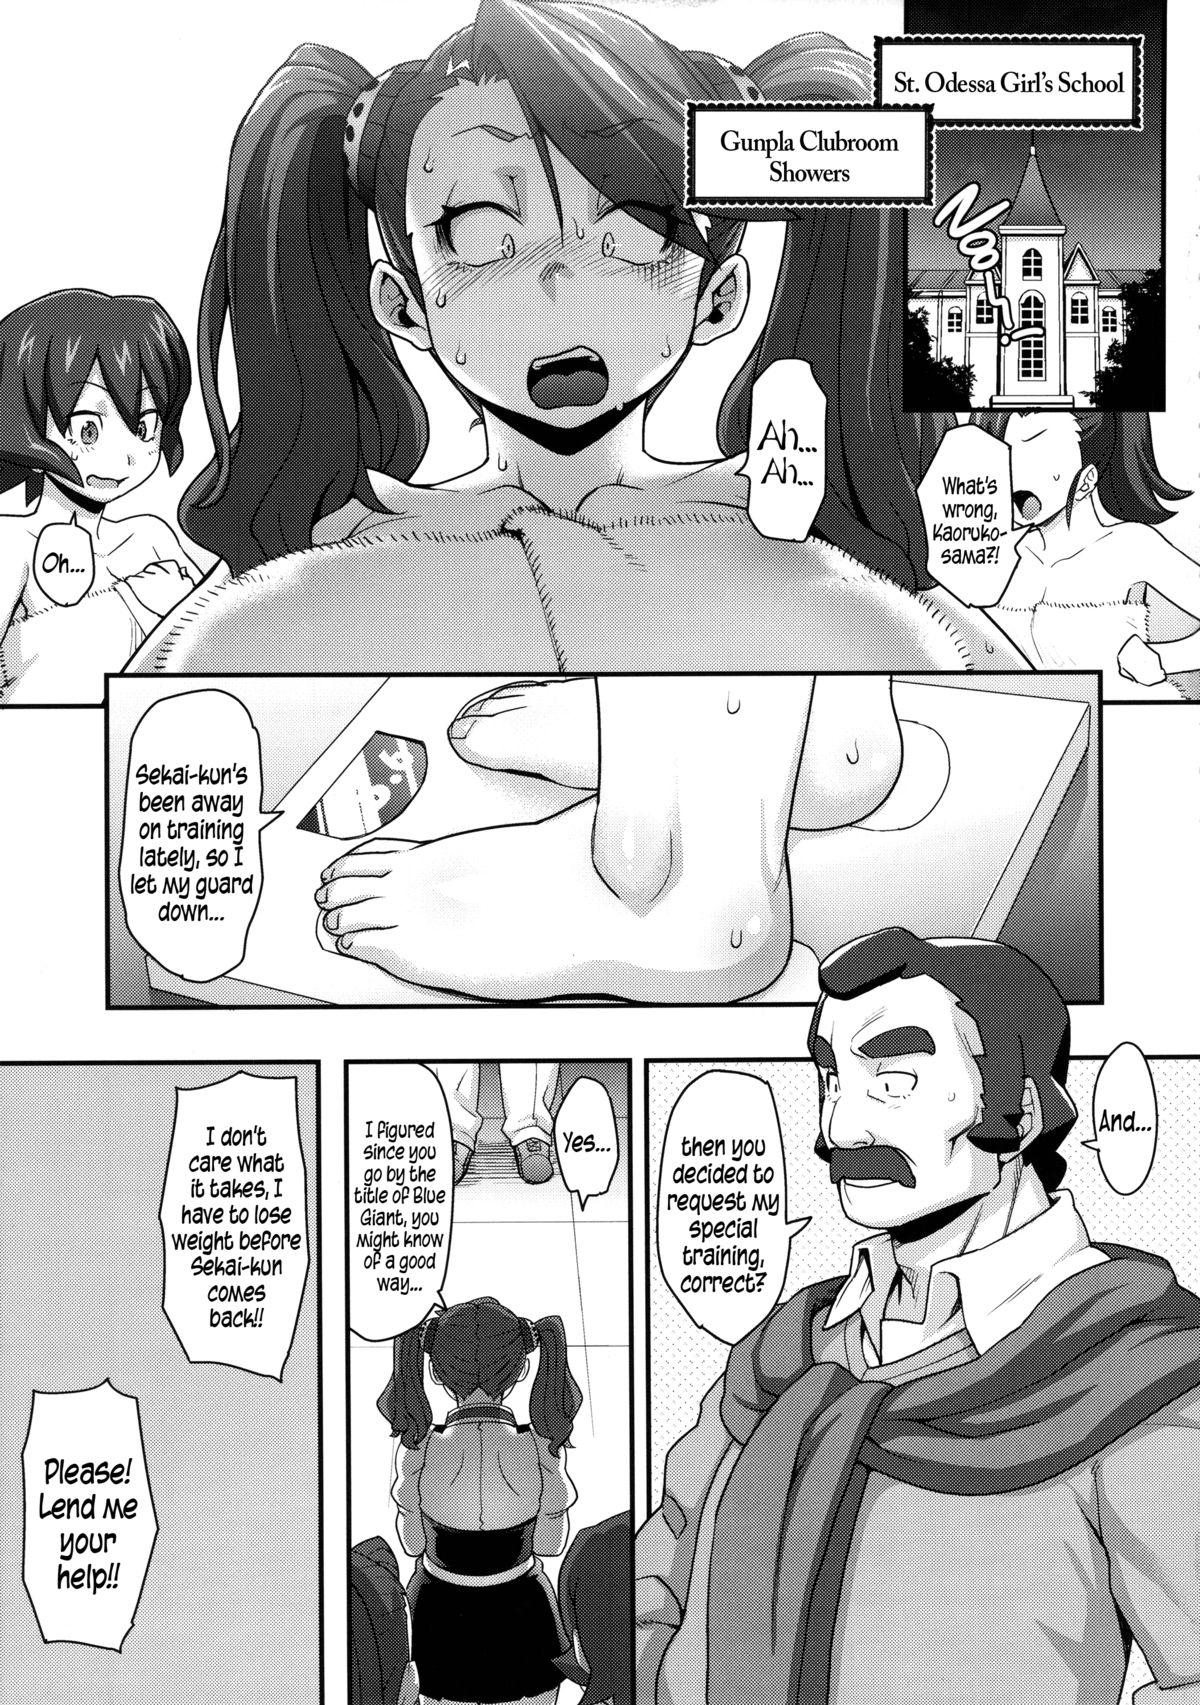 Sucking Cocks SHIRITSUBO | ASSVASE - Gundam build fighters try Super Hot Porn - Page 3